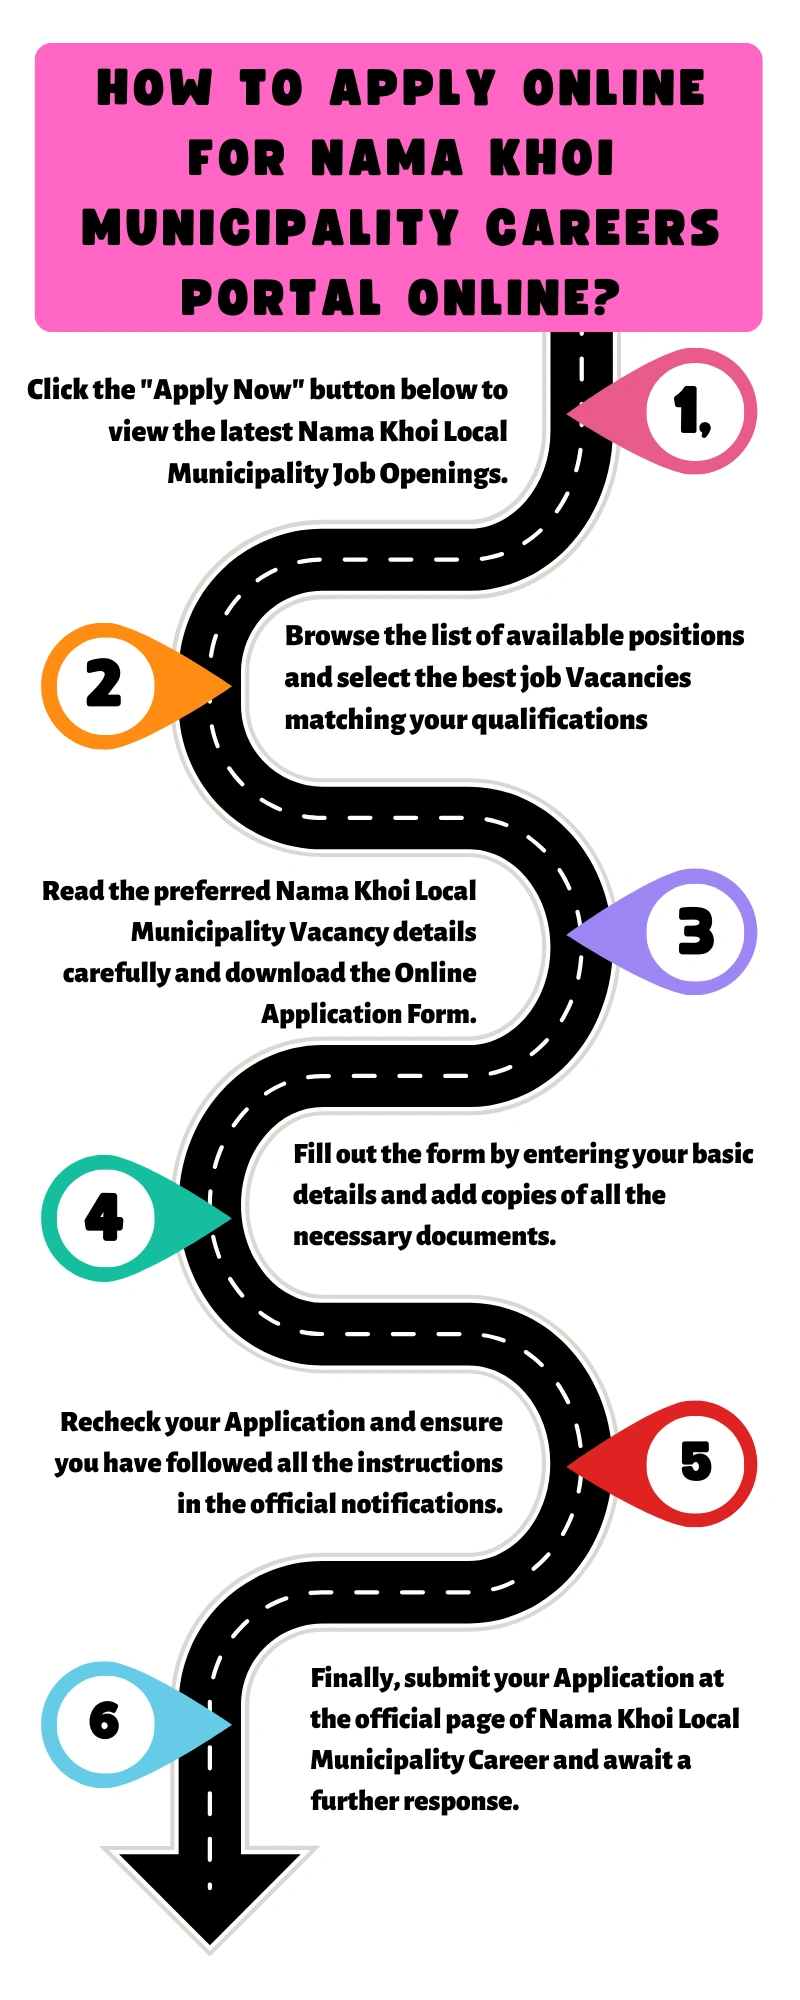 How to Apply online for Nama Khoi Municipality Careers Portal Online?